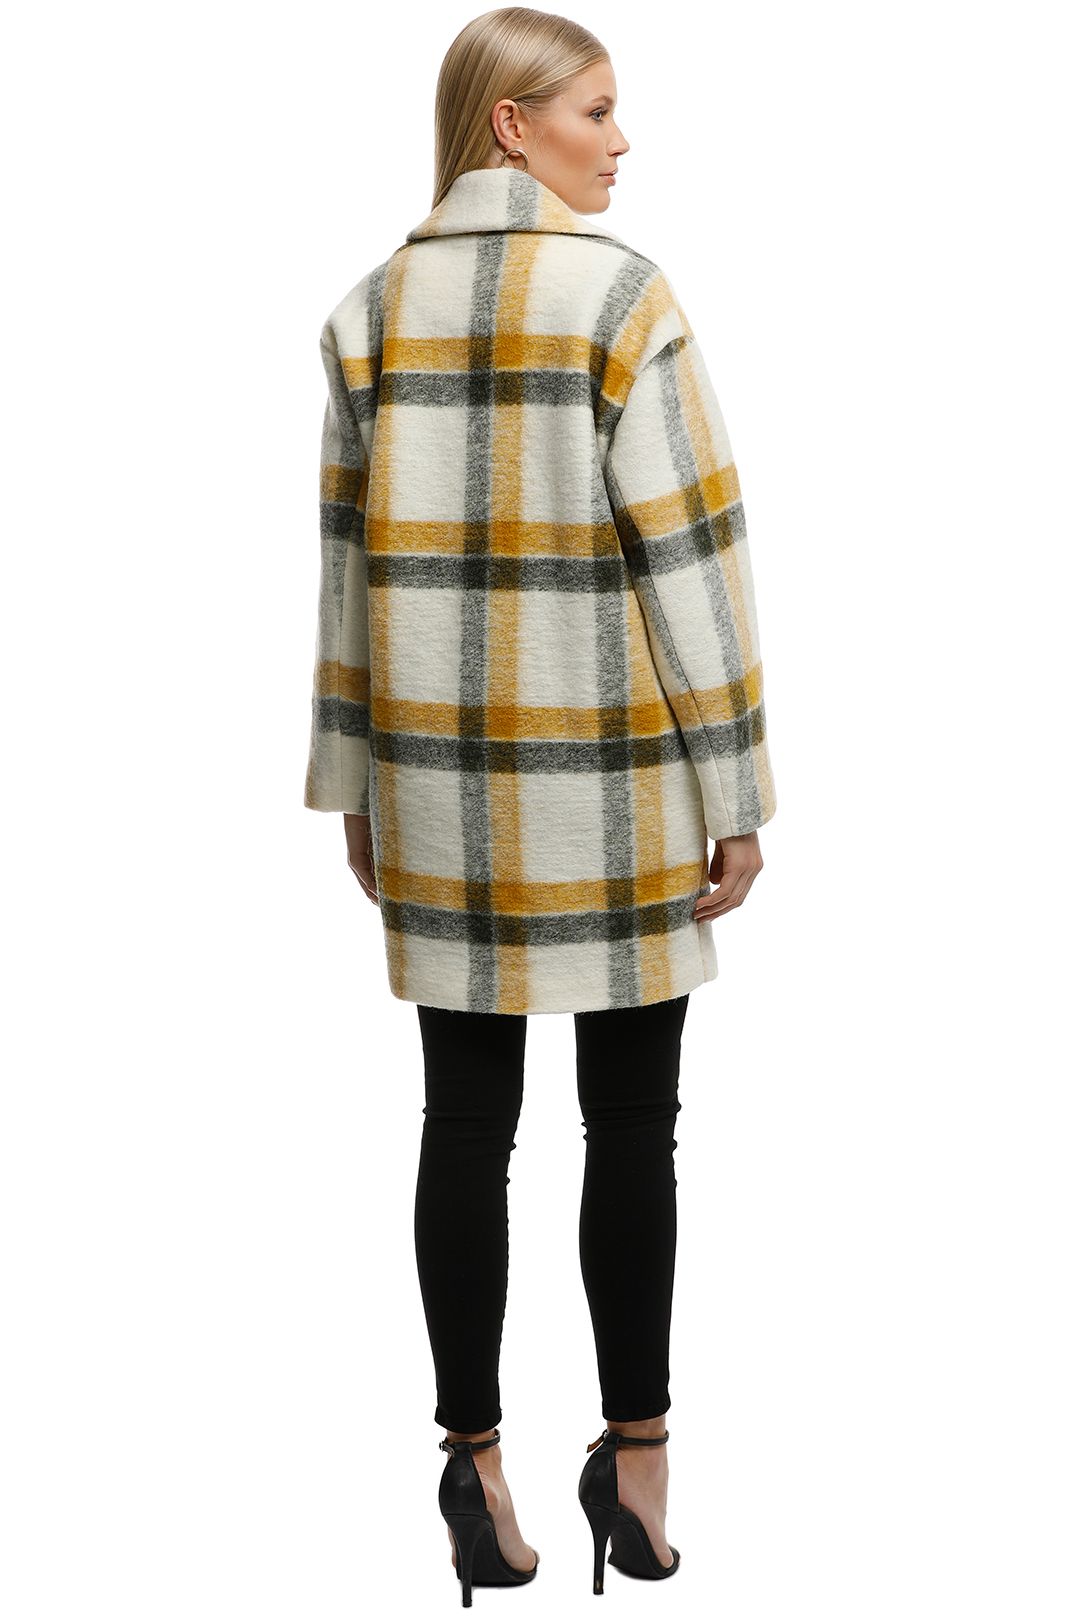 MNG - Unstructured Virgin Wool Coat - Check Print - Back